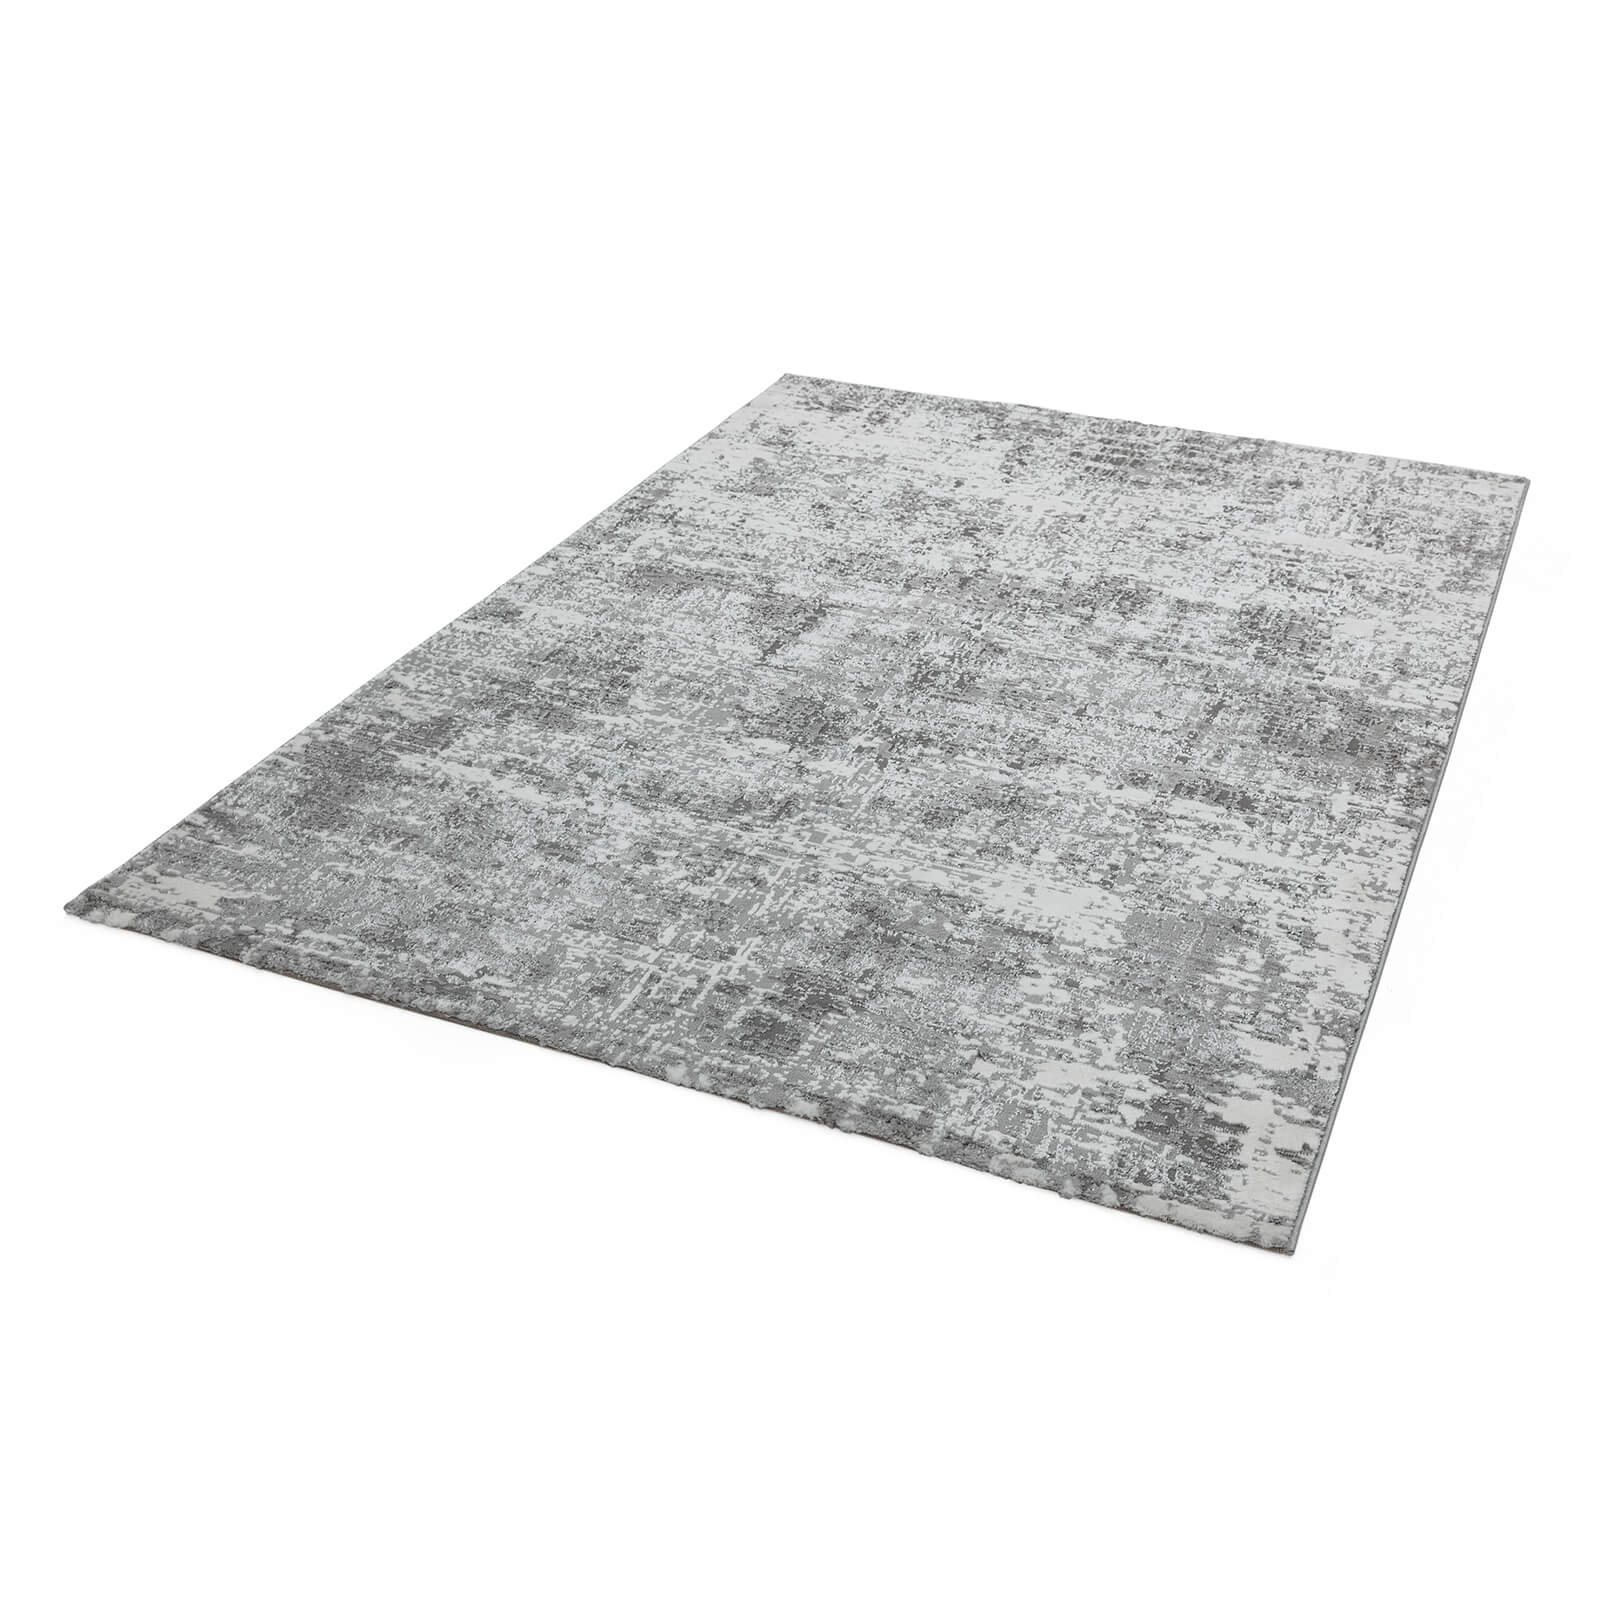 Asiatic Orion OR05 Abstract Silver Rug